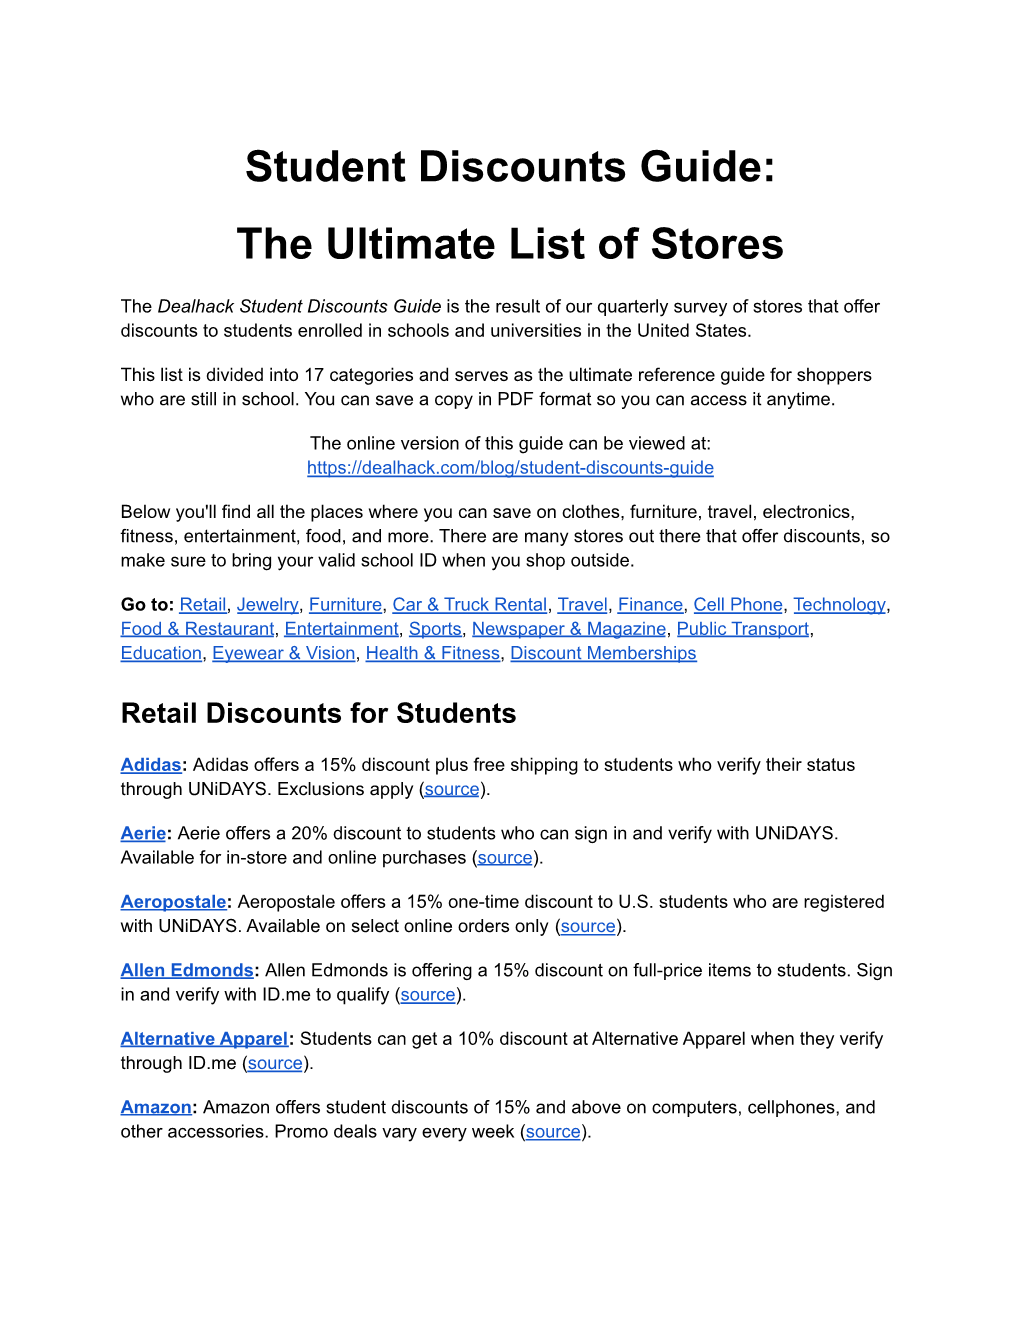 Student Discount Guide